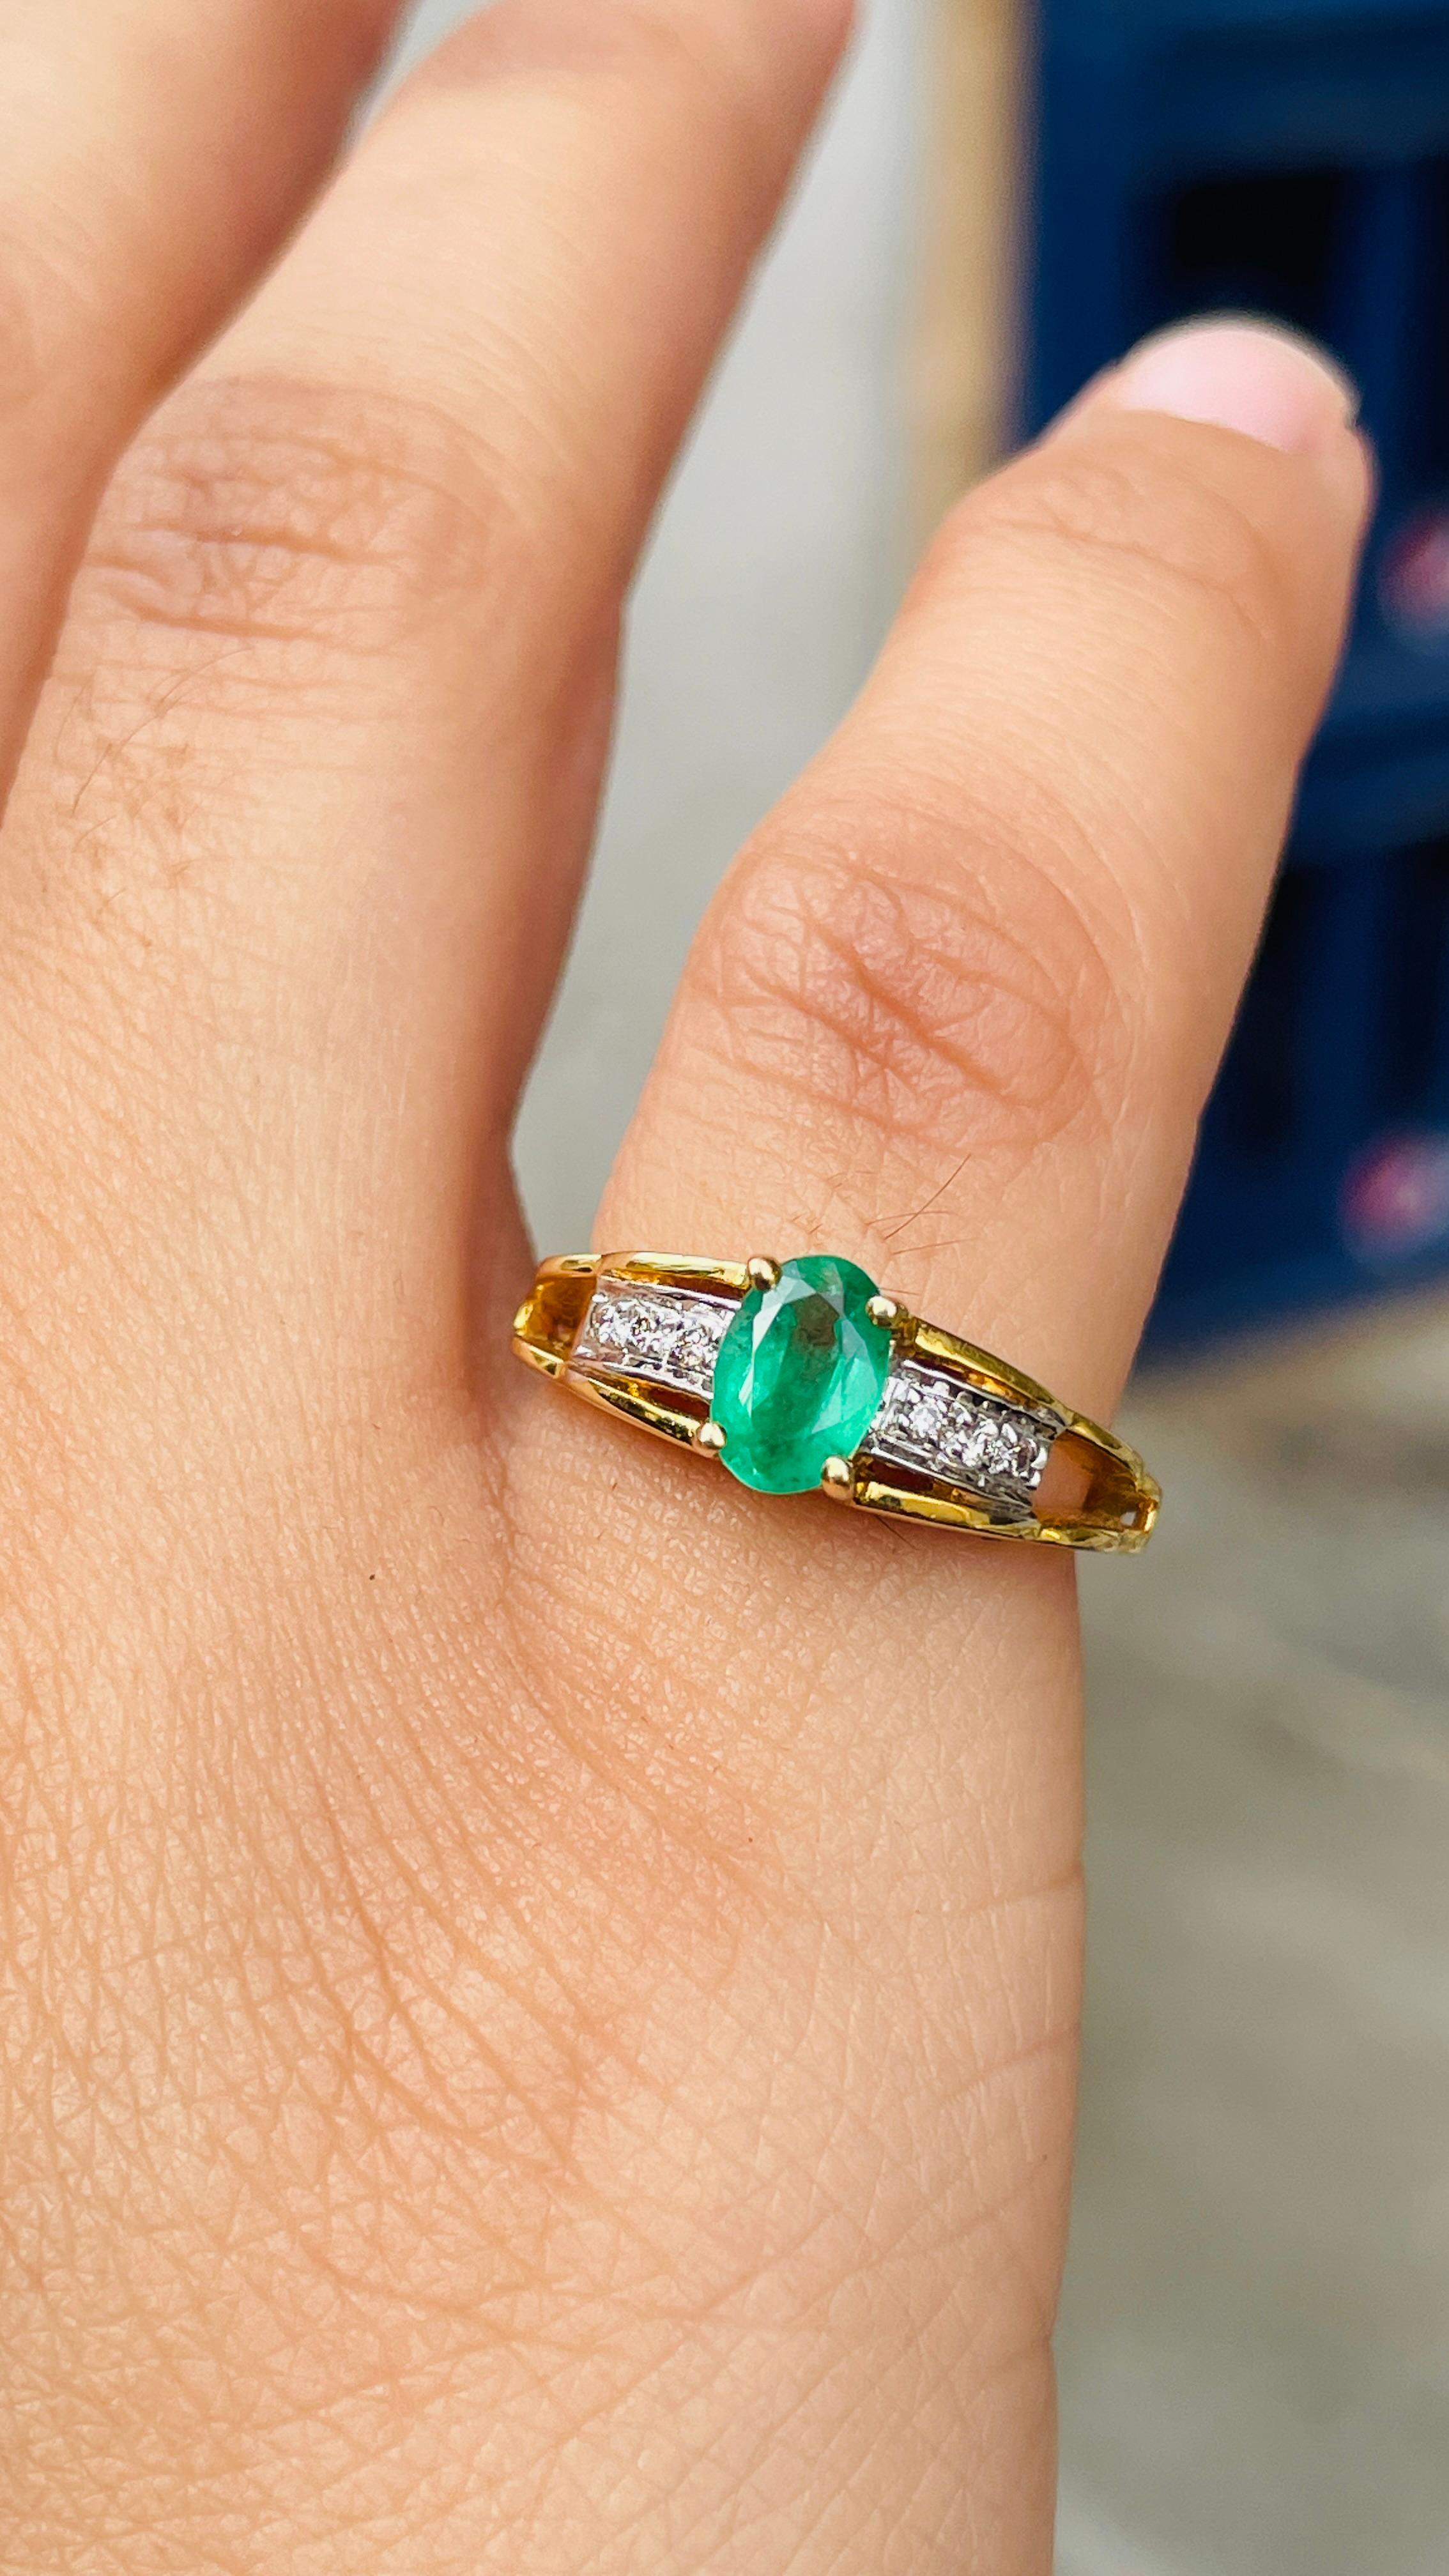 For Sale:  18K Yellow Gold Oval Shaped Emerald Ring with Diamonds 4